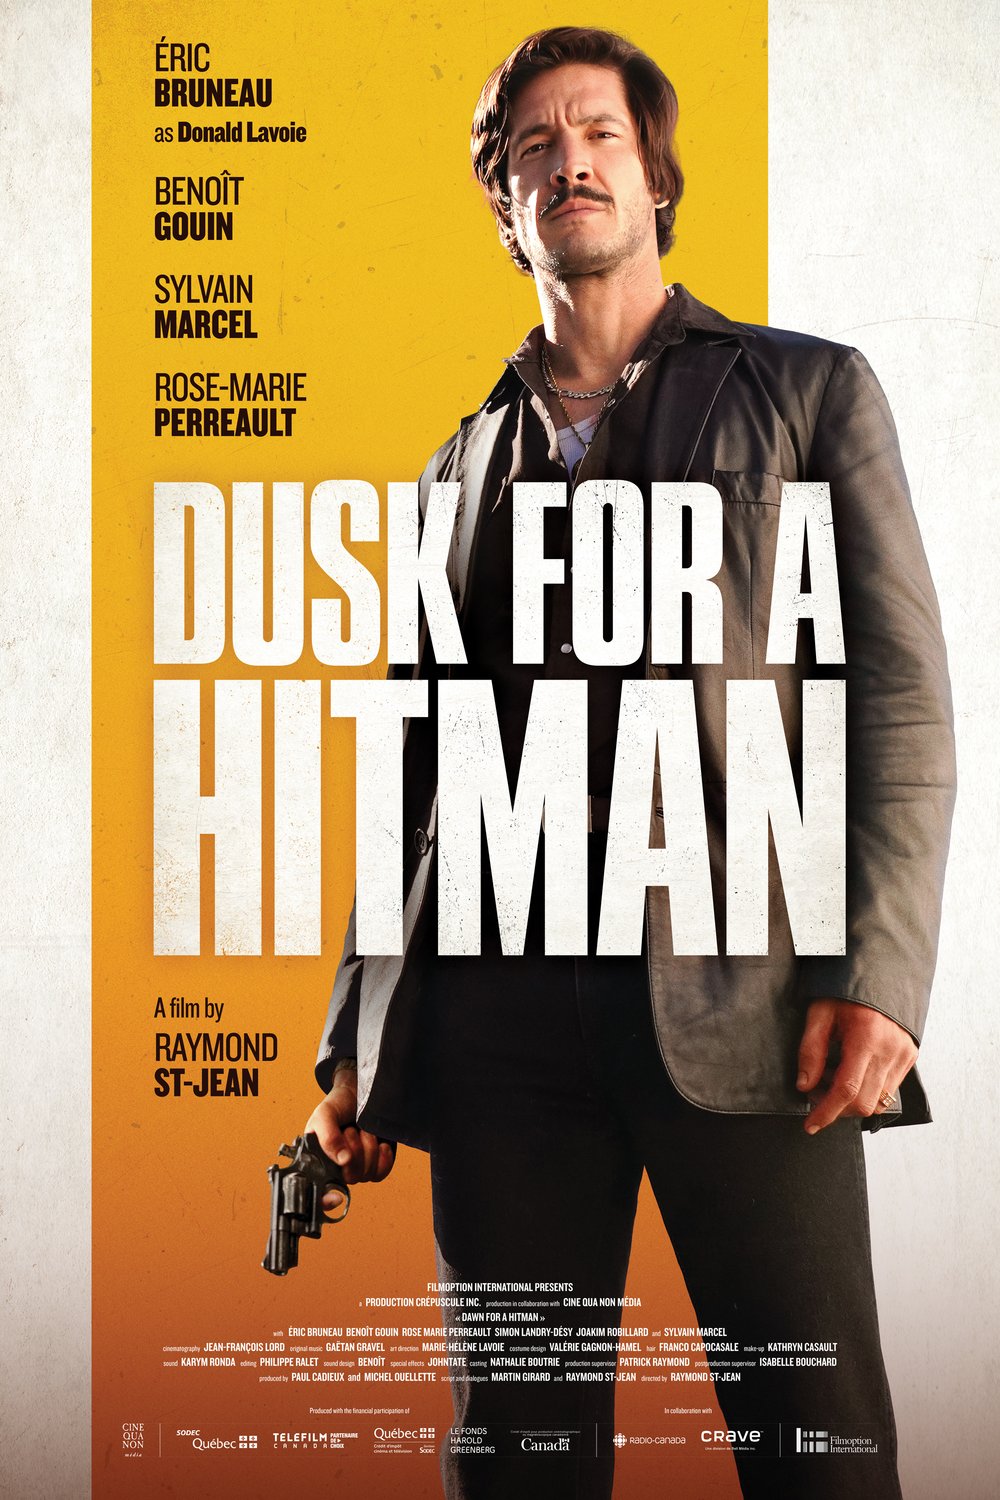 Poster of the movie Dusk for a Hitman